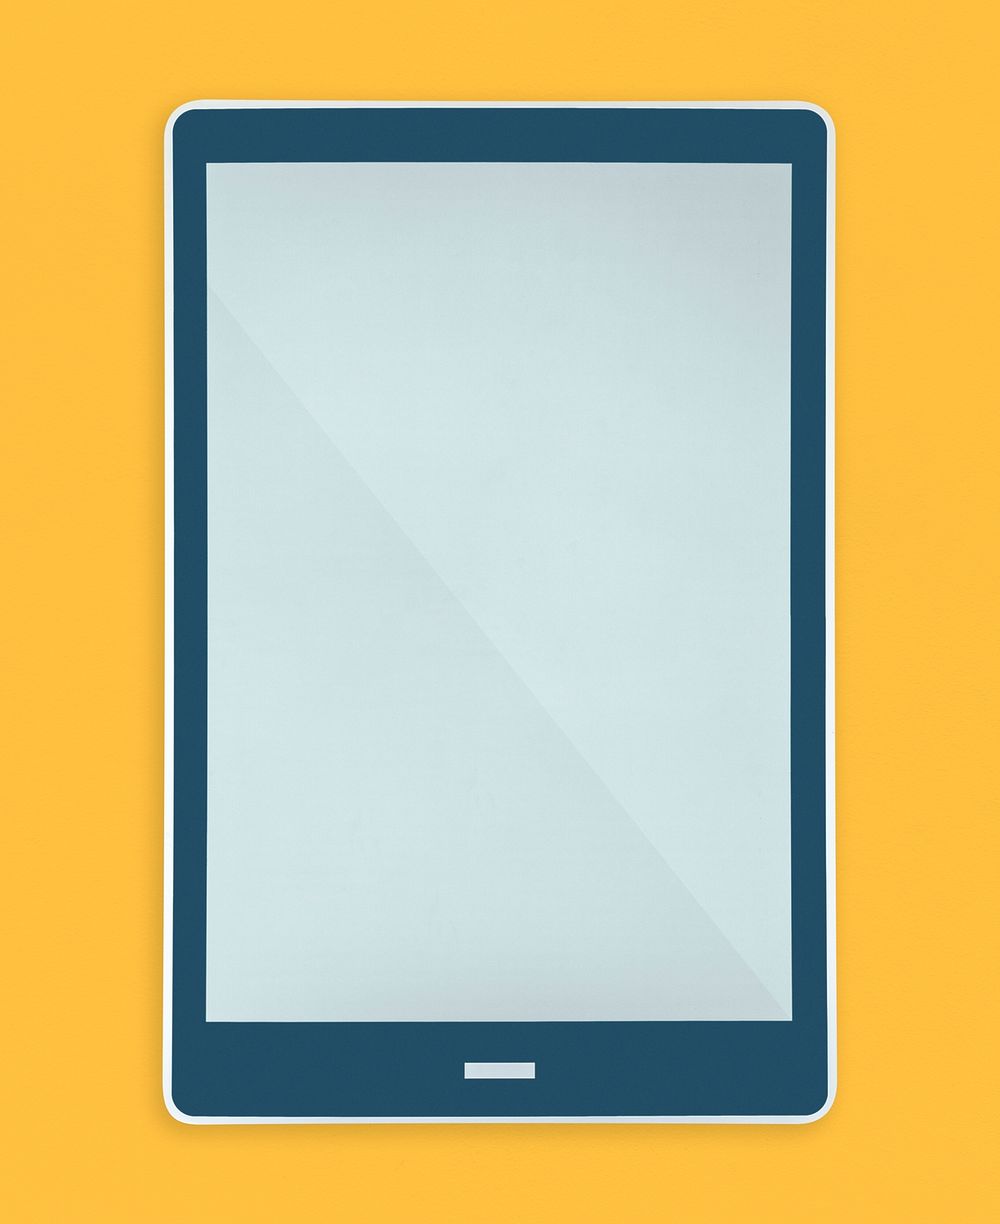 Mobile phone icon isolated